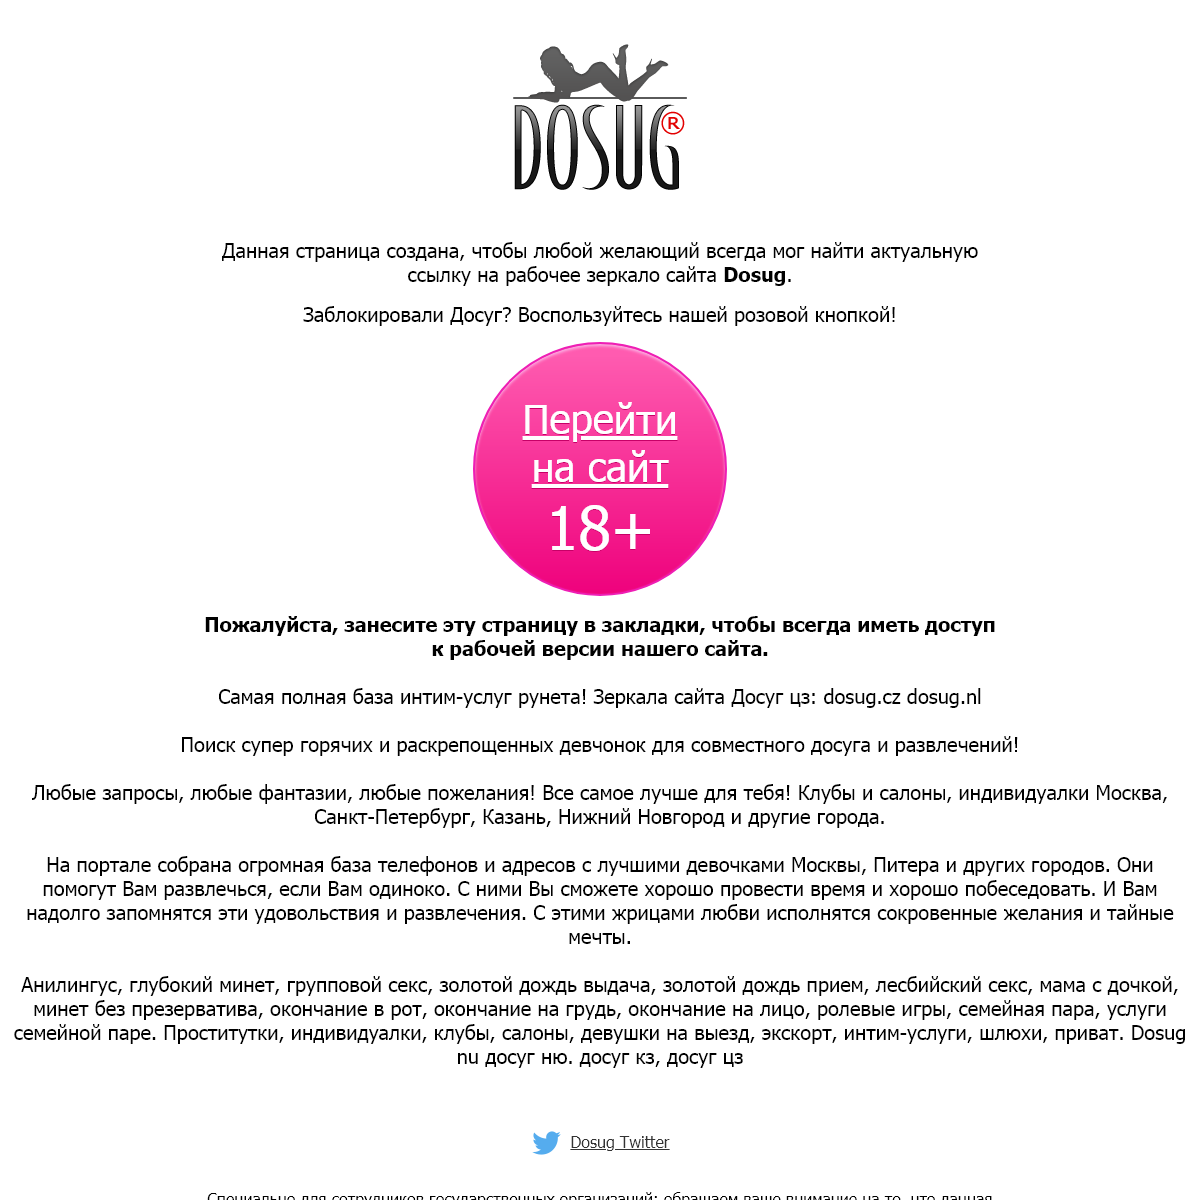 A complete backup of www.dosug.cz